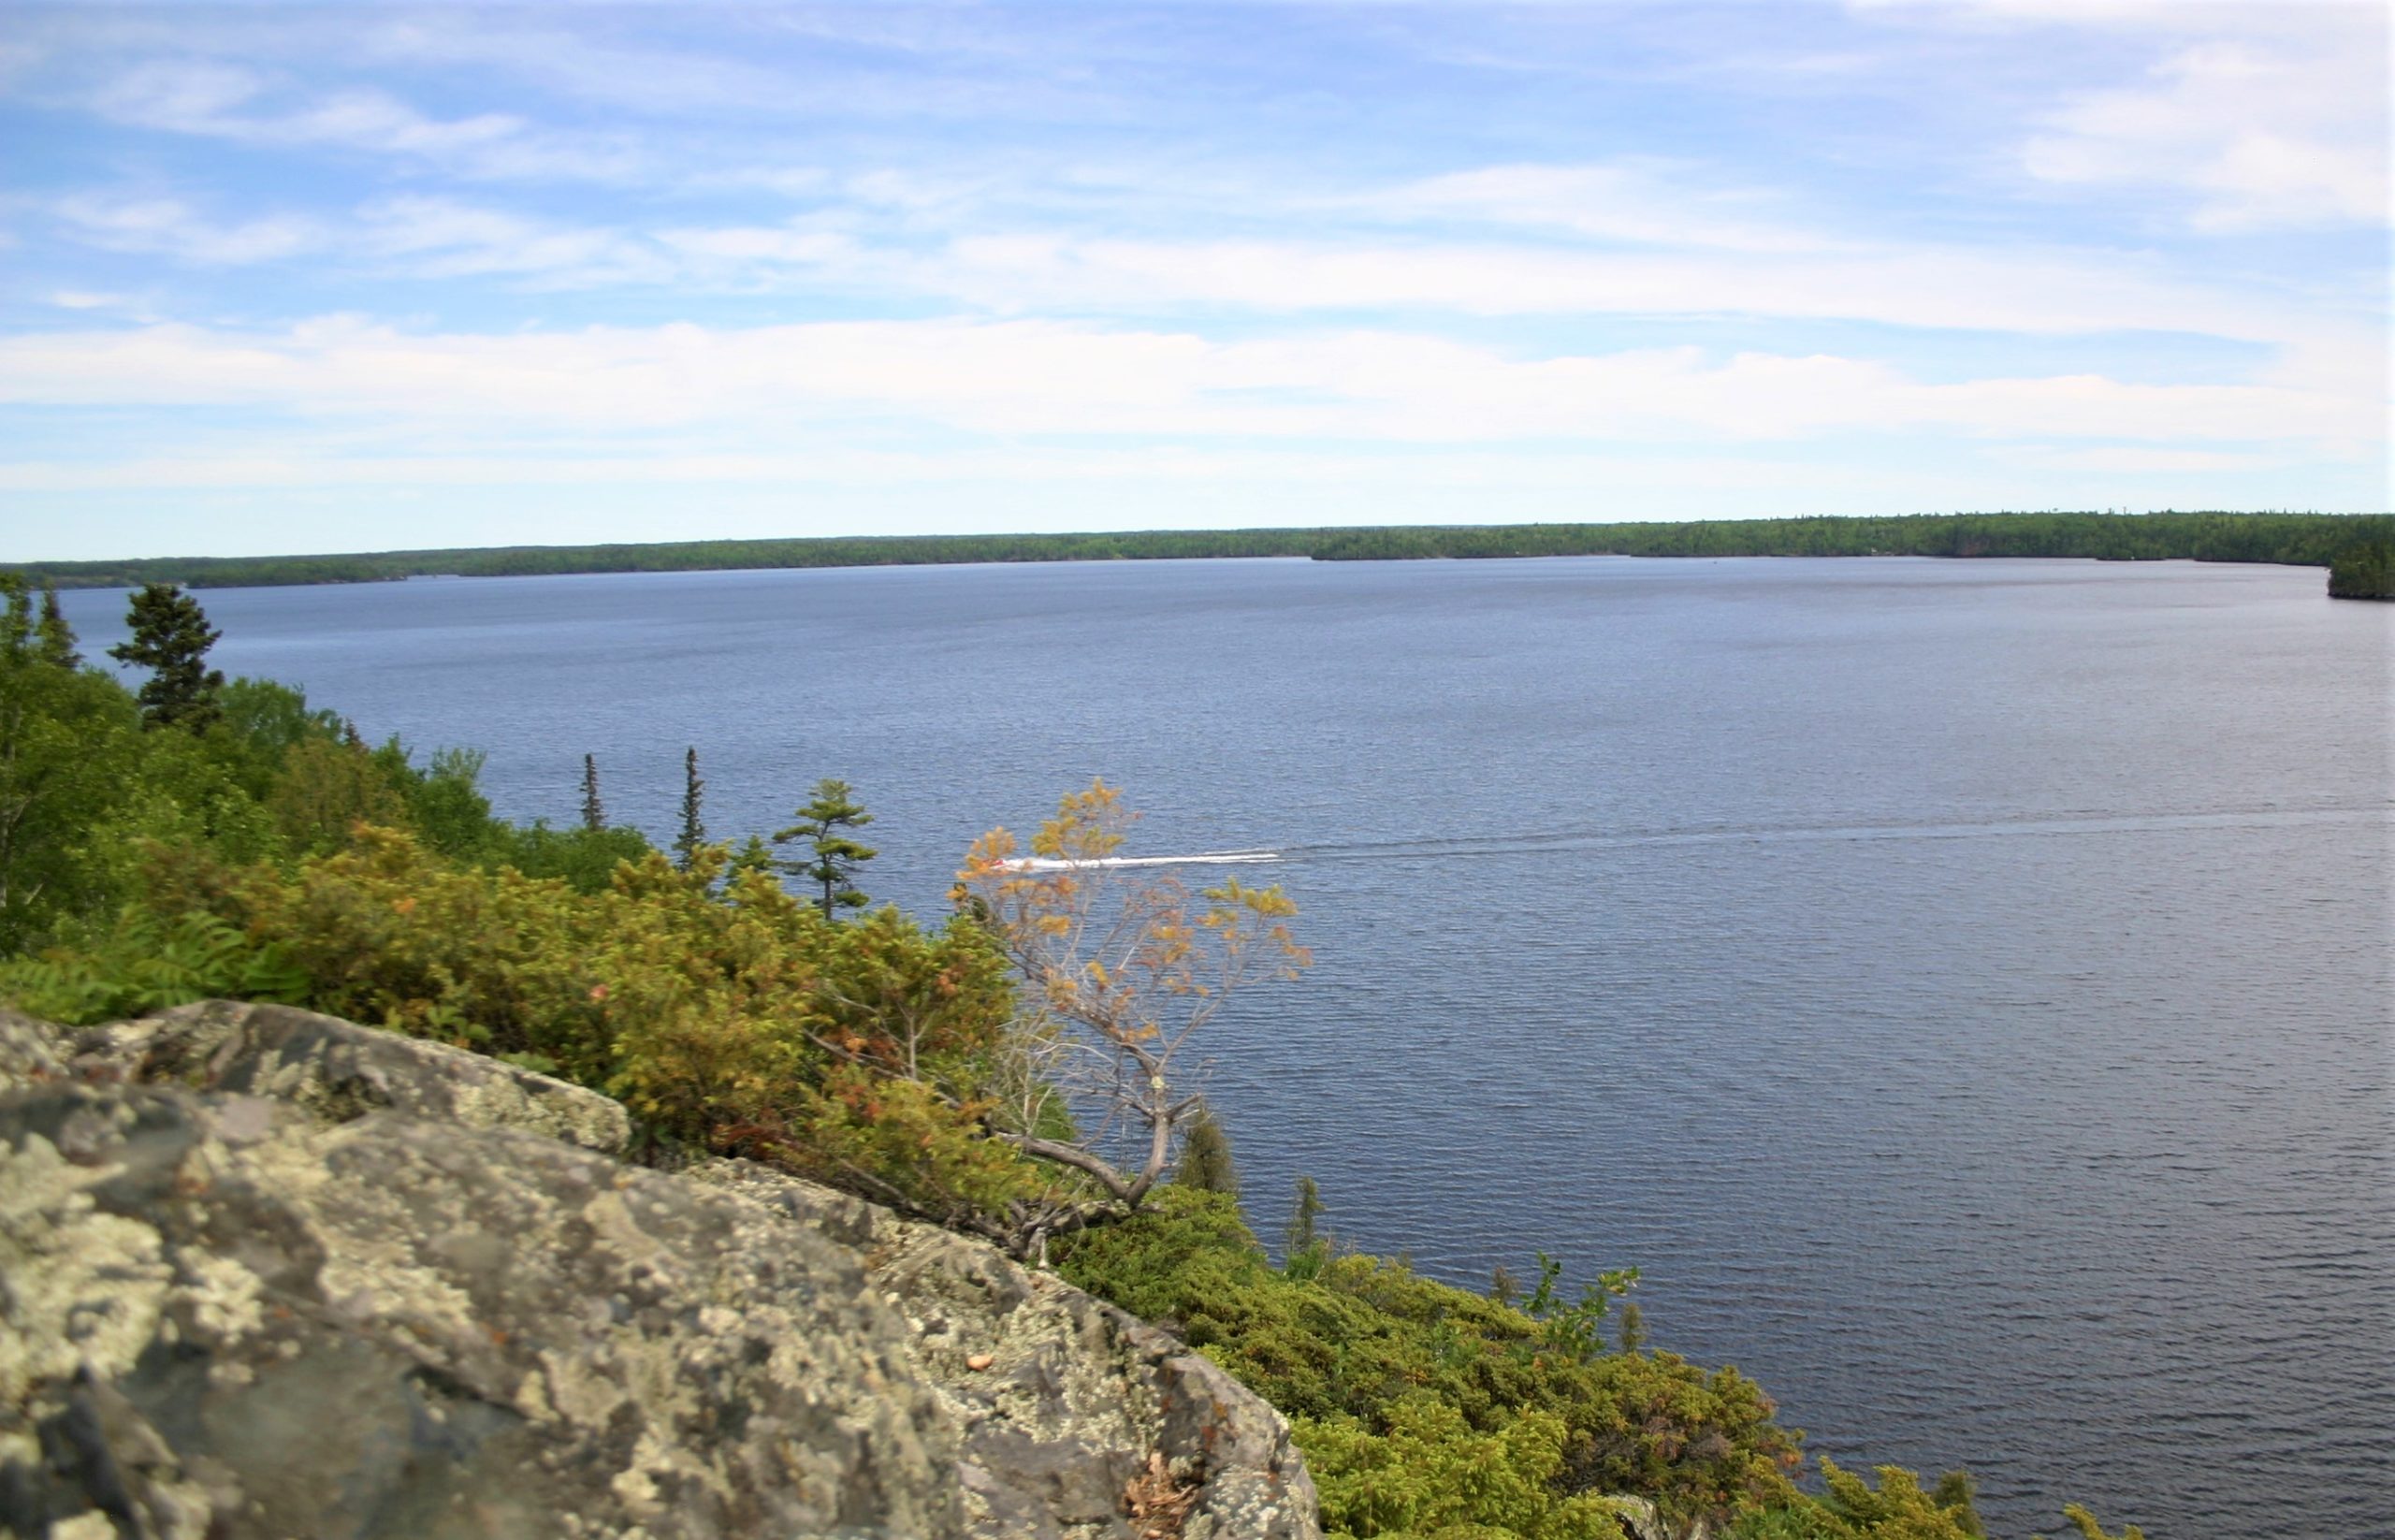 View from a rocky ledge looking out over a lake. The far bank is visible in the distance.